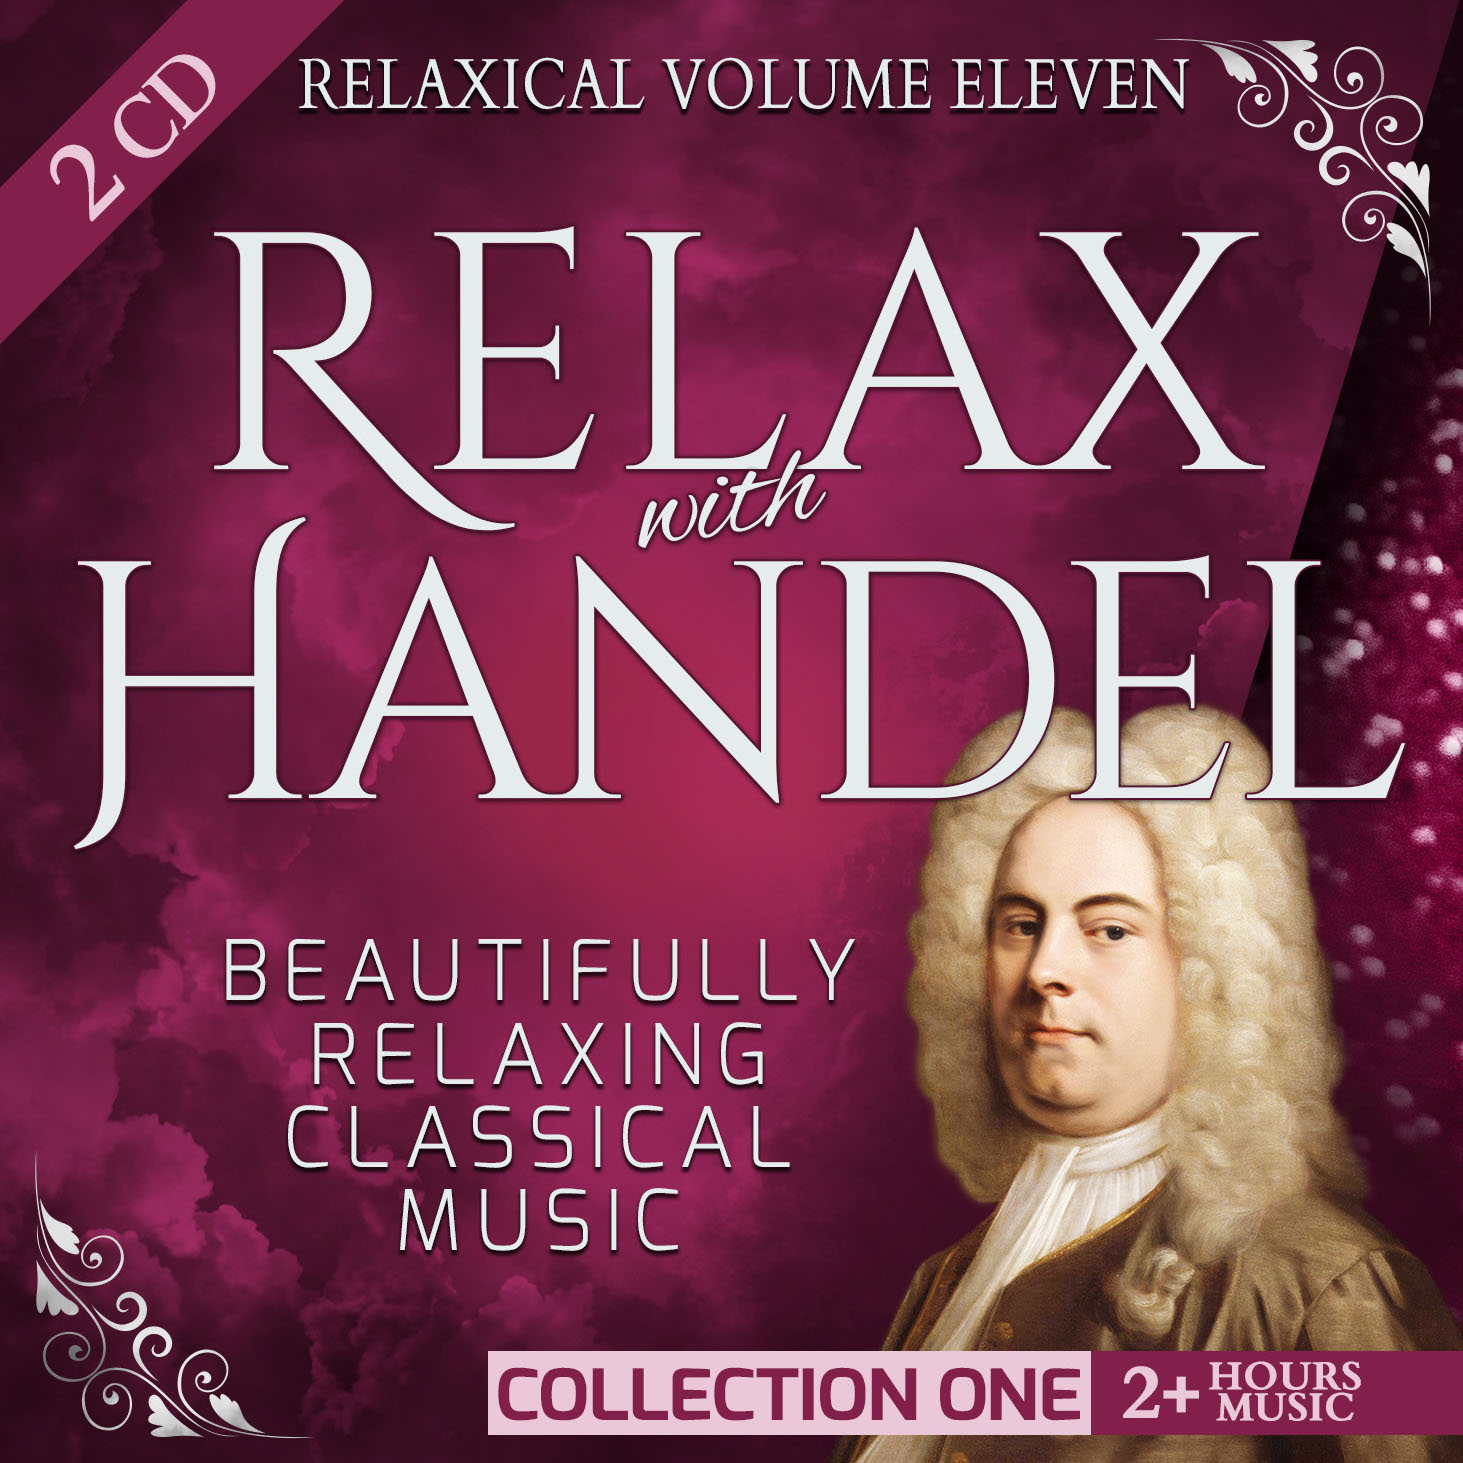 Volume 11 - Relax with Handel (Collection One): Beautifully Relaxing Classical Music